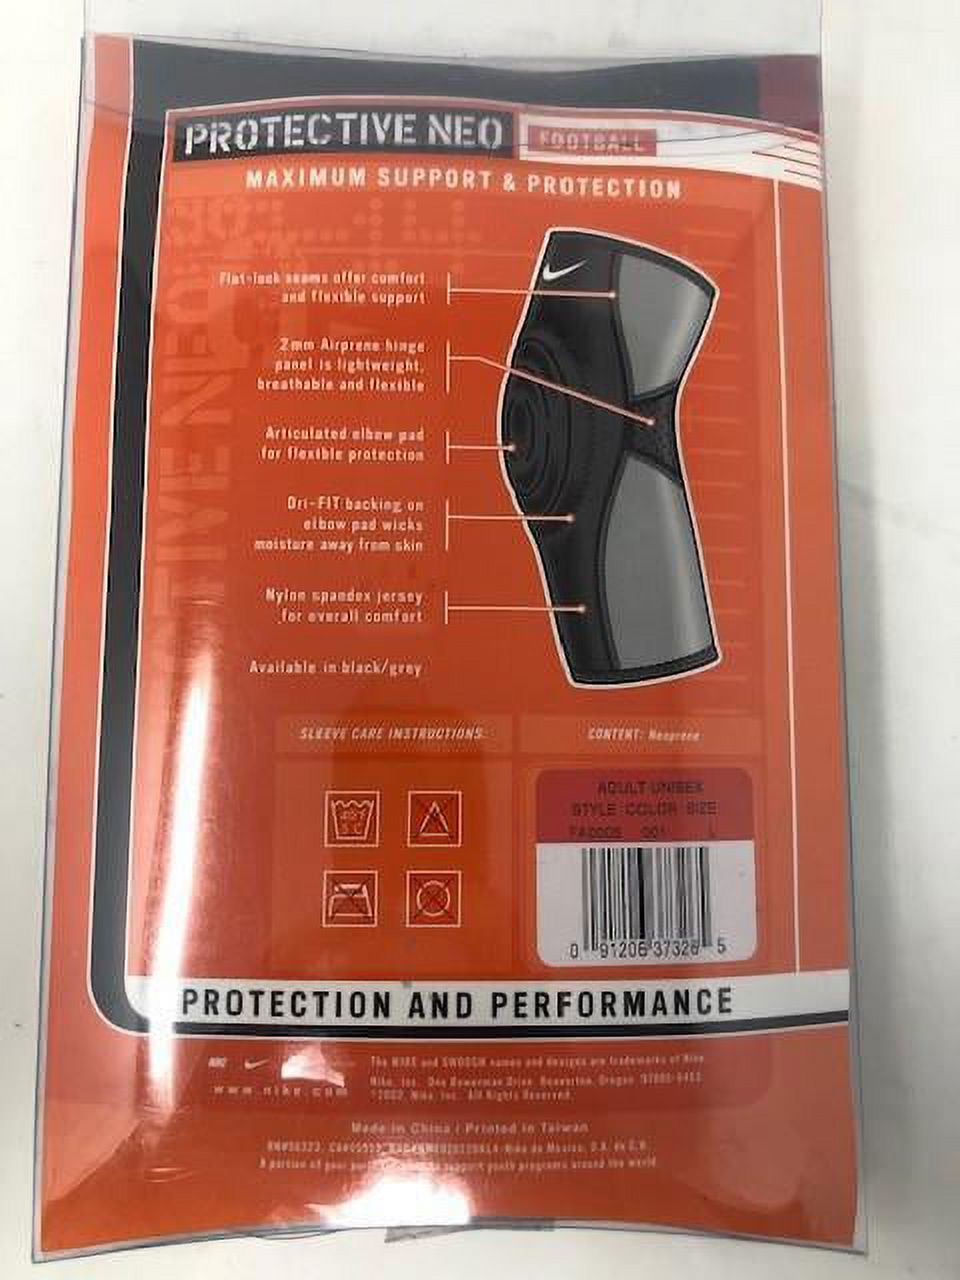 Nike Max Support Protective Neo Sleeve - Single Sleeve - XL (Black/Grey) - image 4 of 4